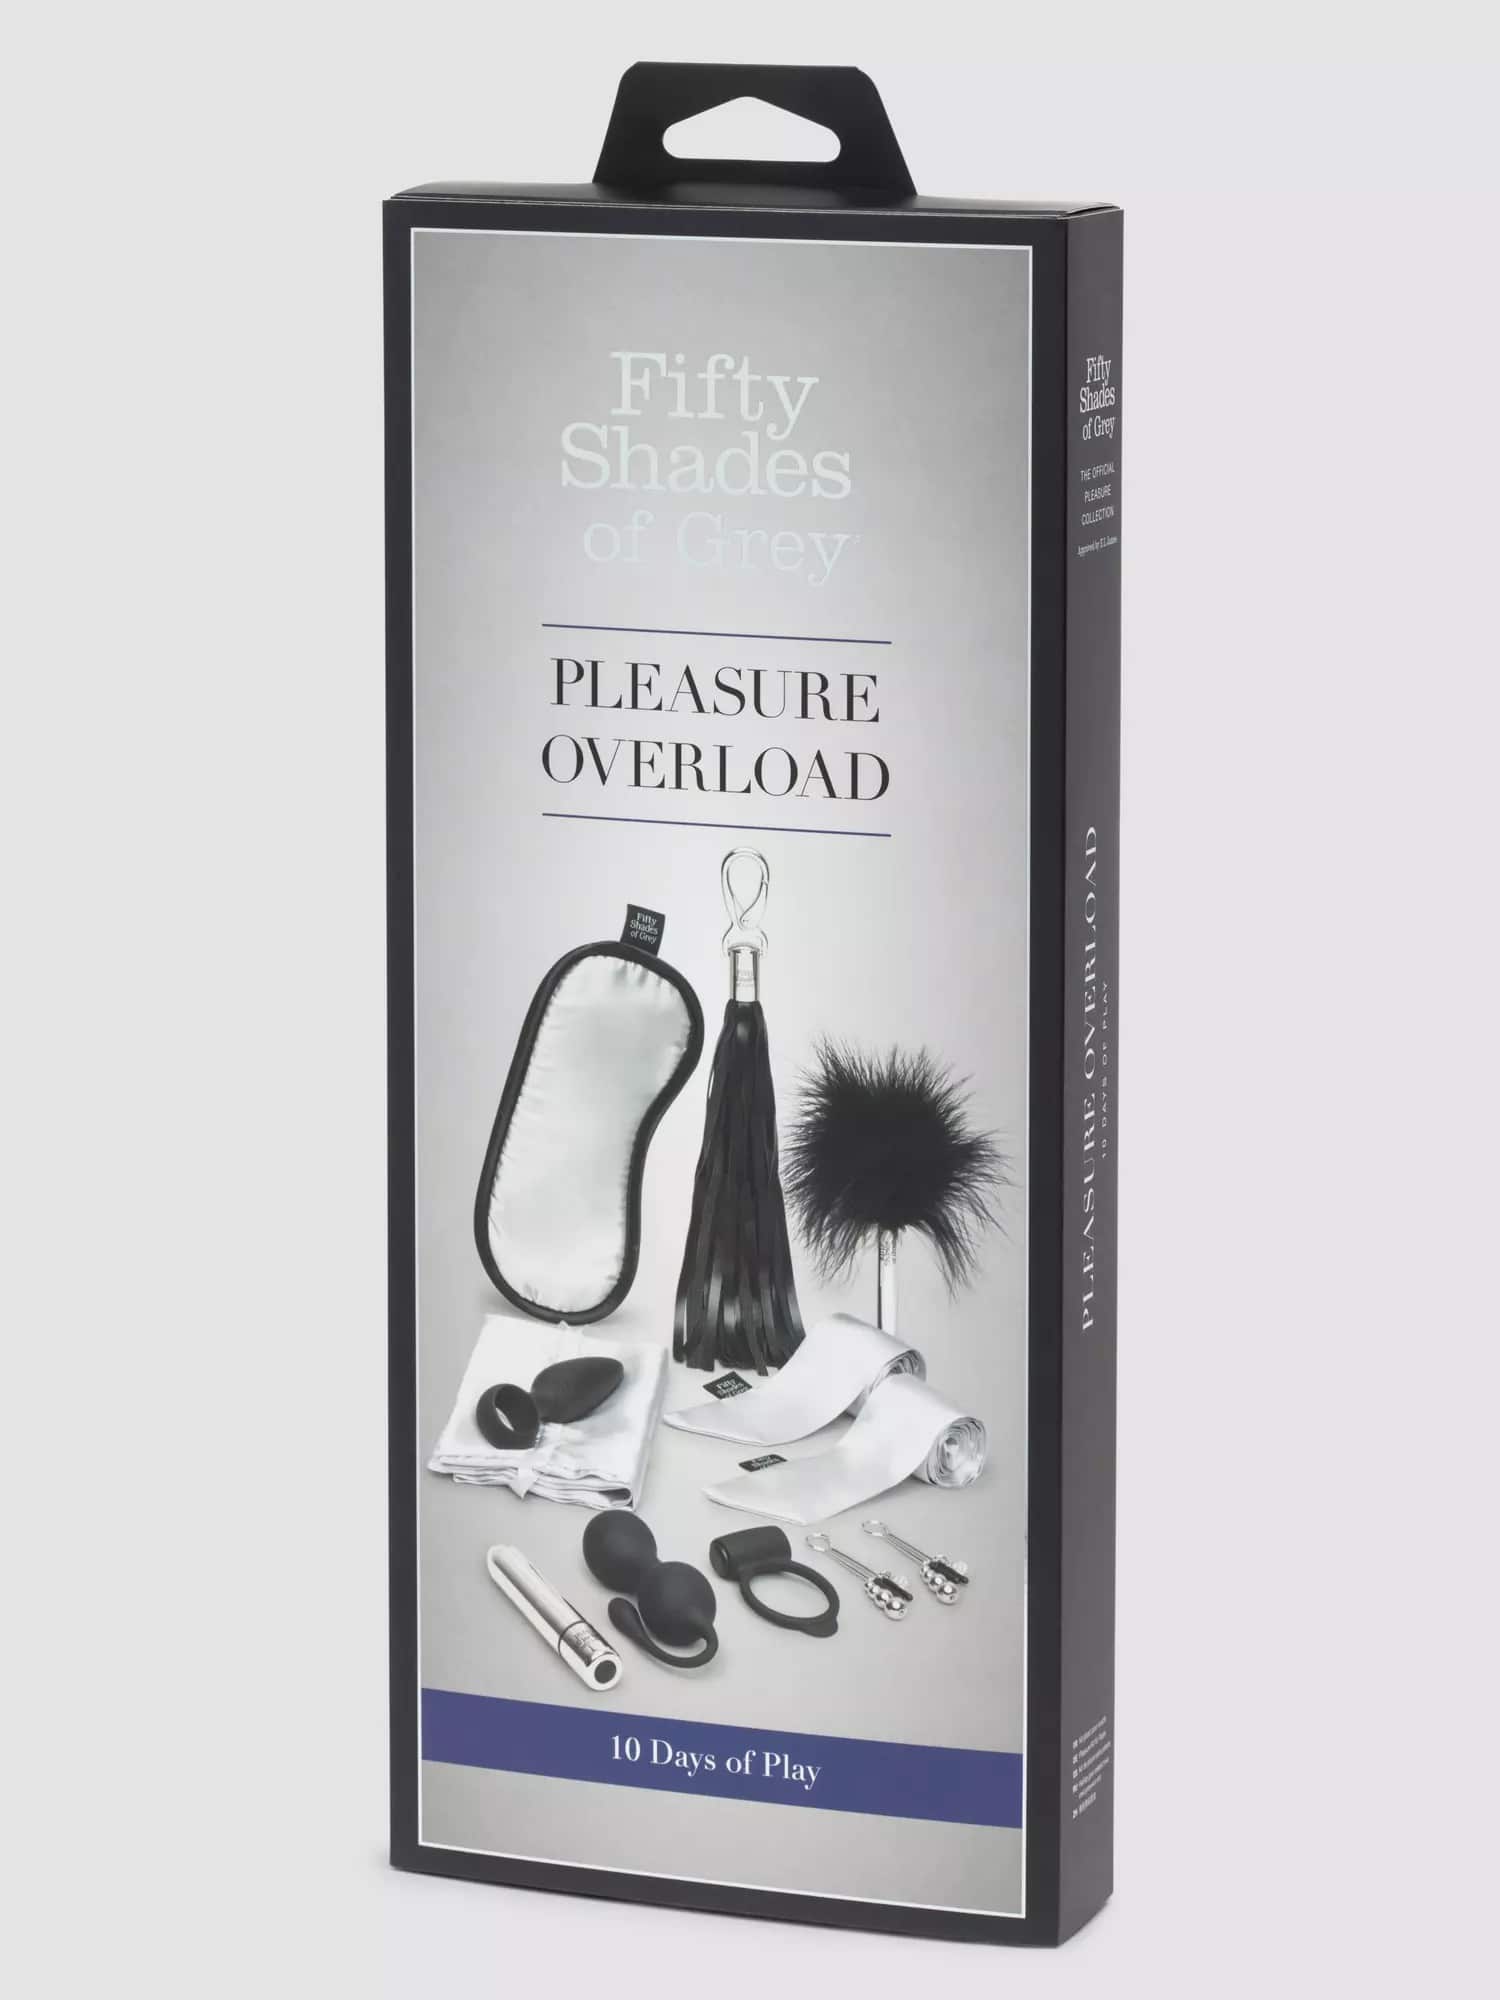 Fifty Shades of Grey Pleasure Overload 10 Days of Play Gift Set. Slide 6